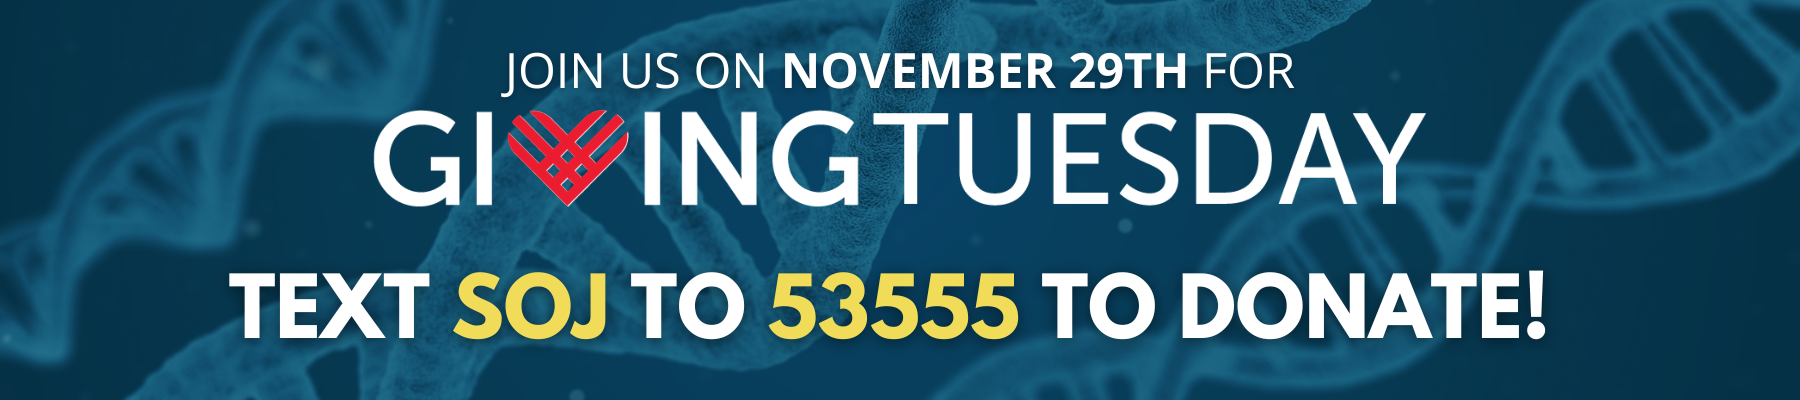 Join us on November 29th for Giving Tuesday - Text SOJ to 53555 to Donate!